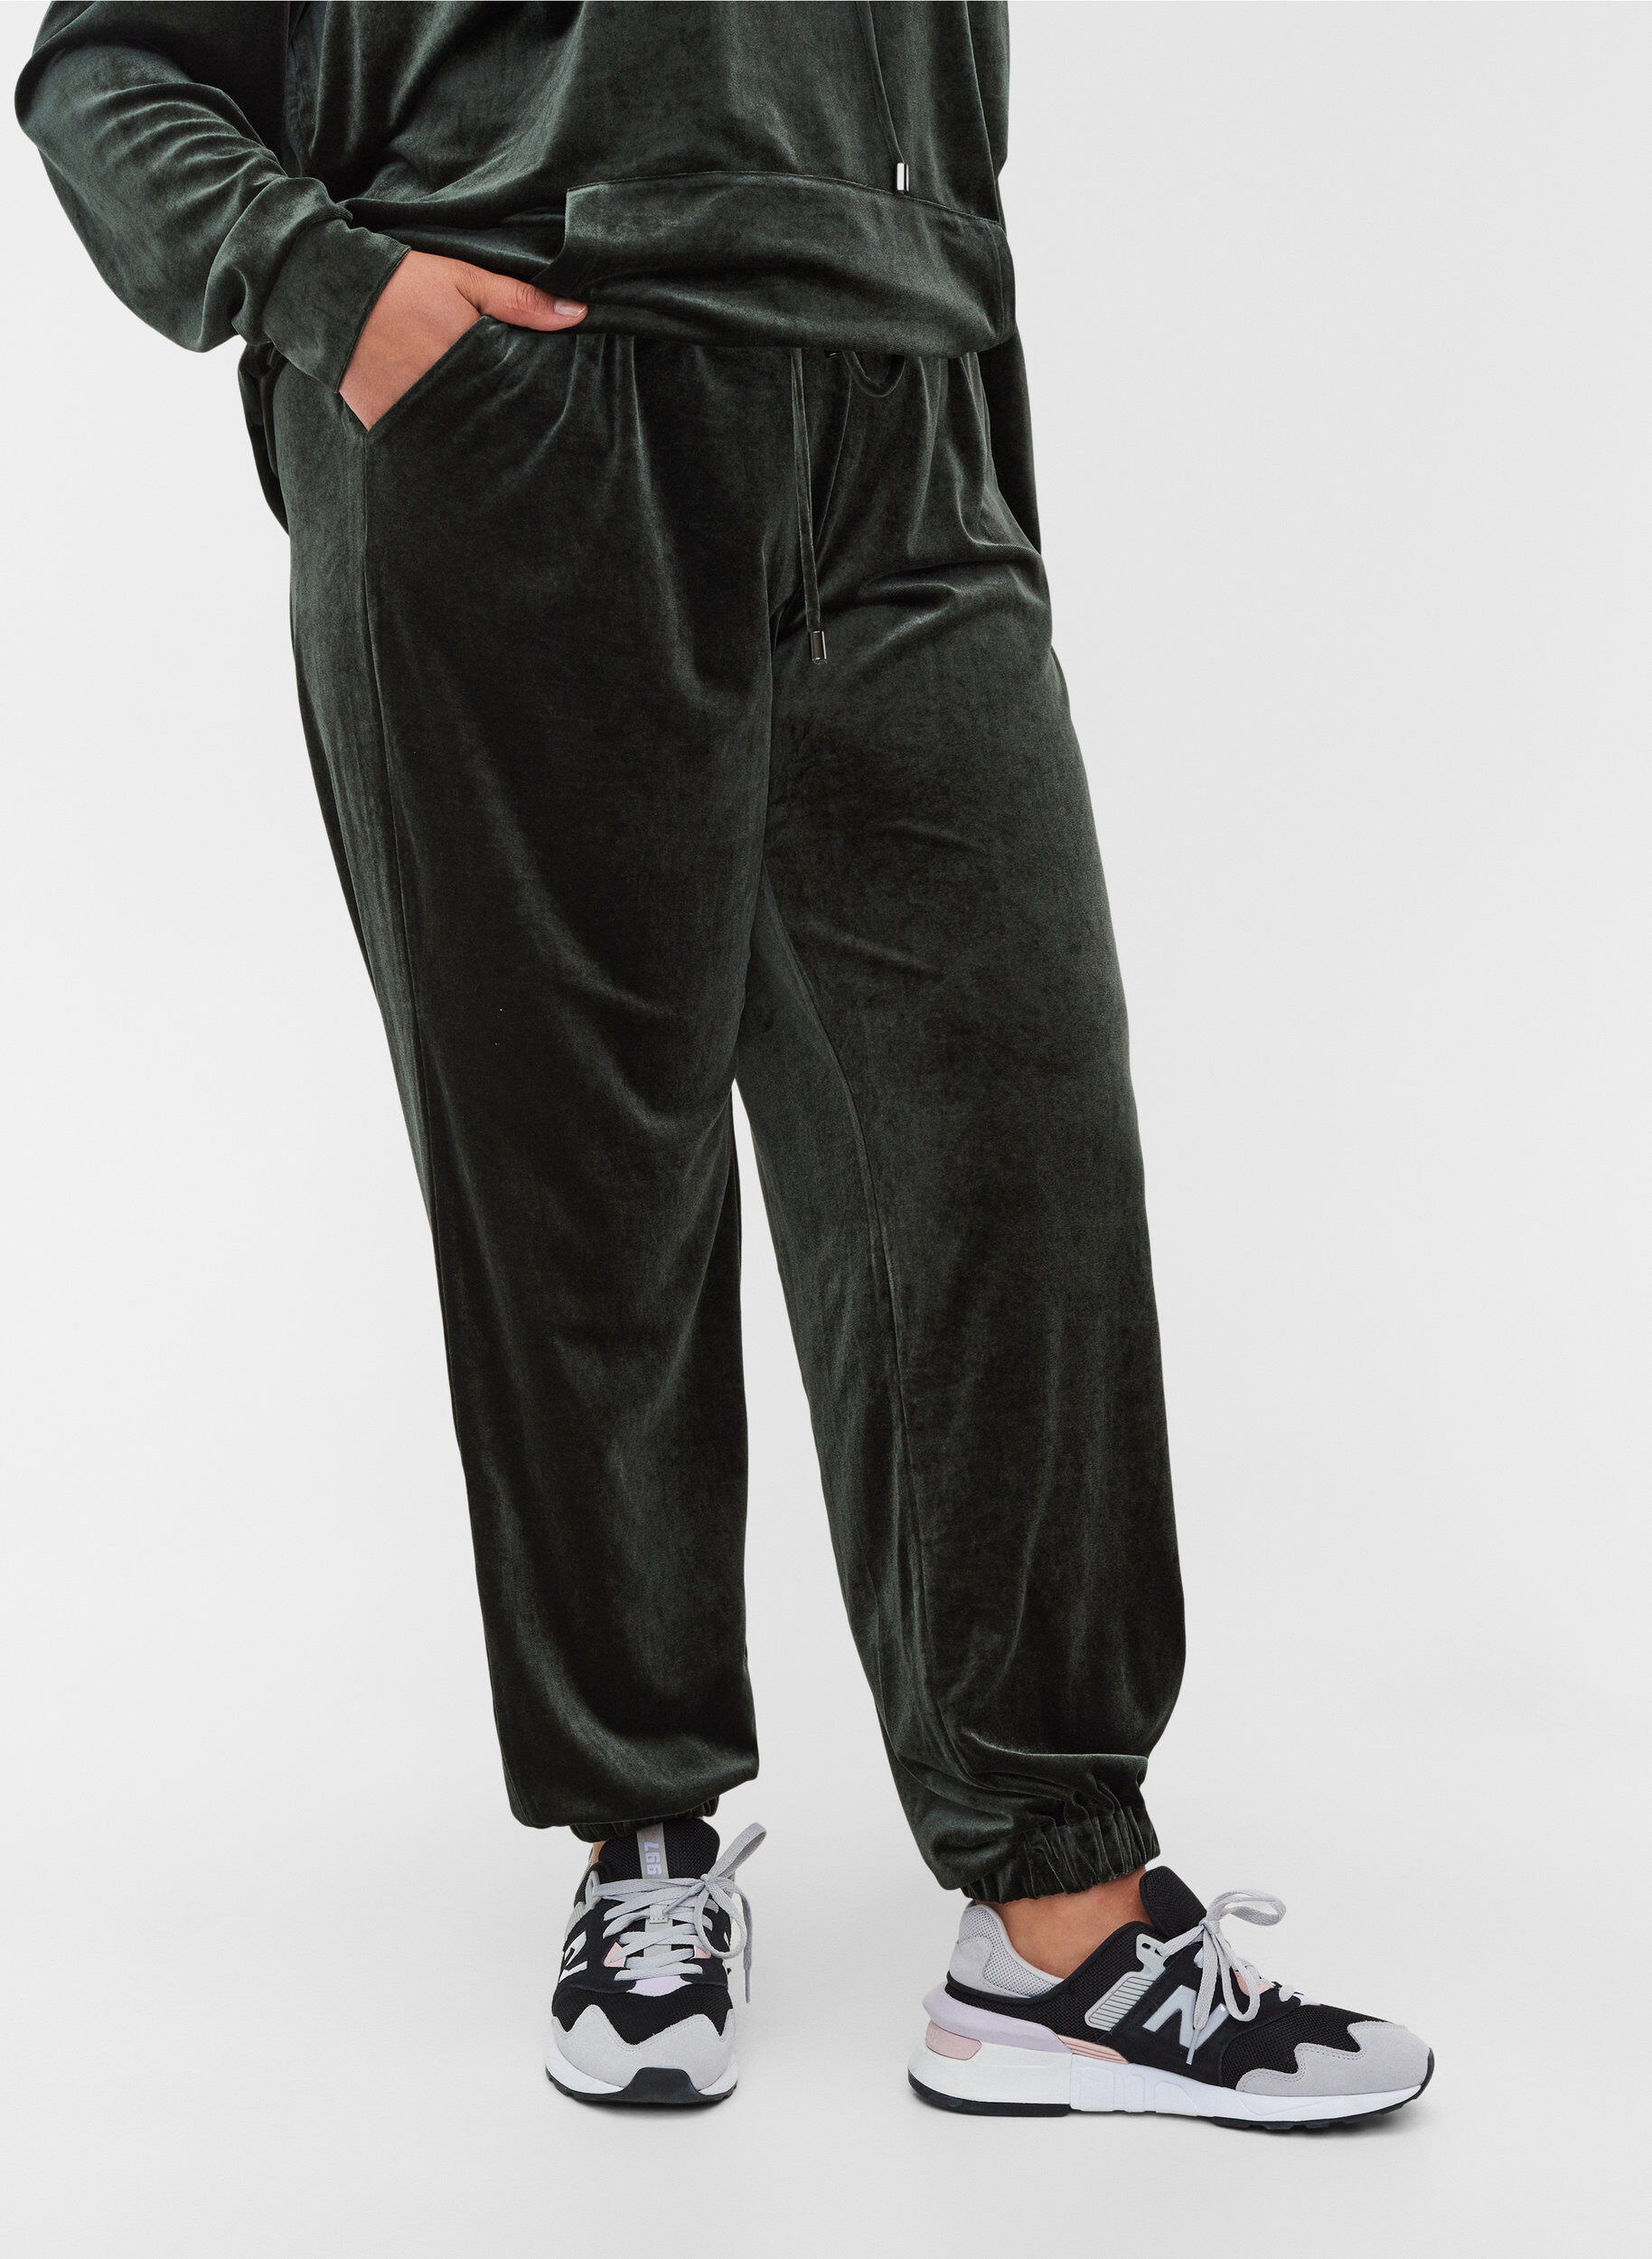 Loose velour sweatpants with pockets